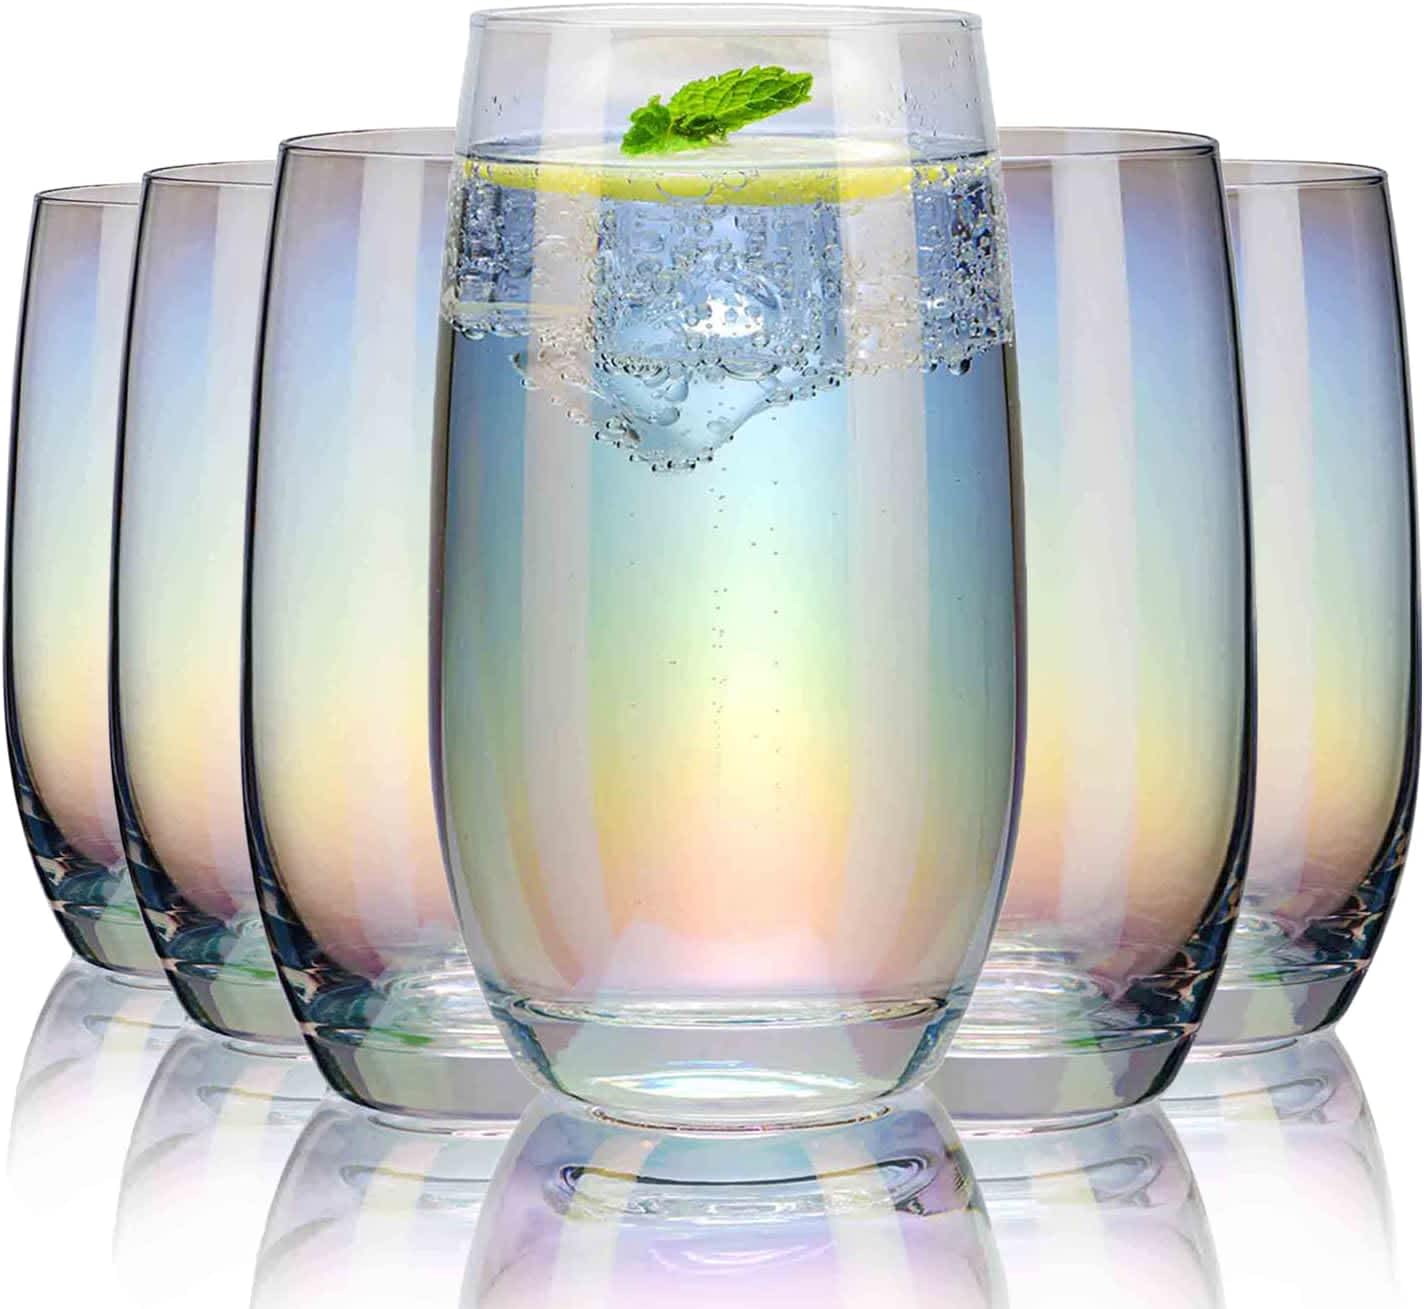 http://cdn.apartmenttherapy.info/image/upload/v1688681662/gen-workflow/product-database/CUKBLESS_Iridescent_Drinking_Glasses_Set_of_6.jpg